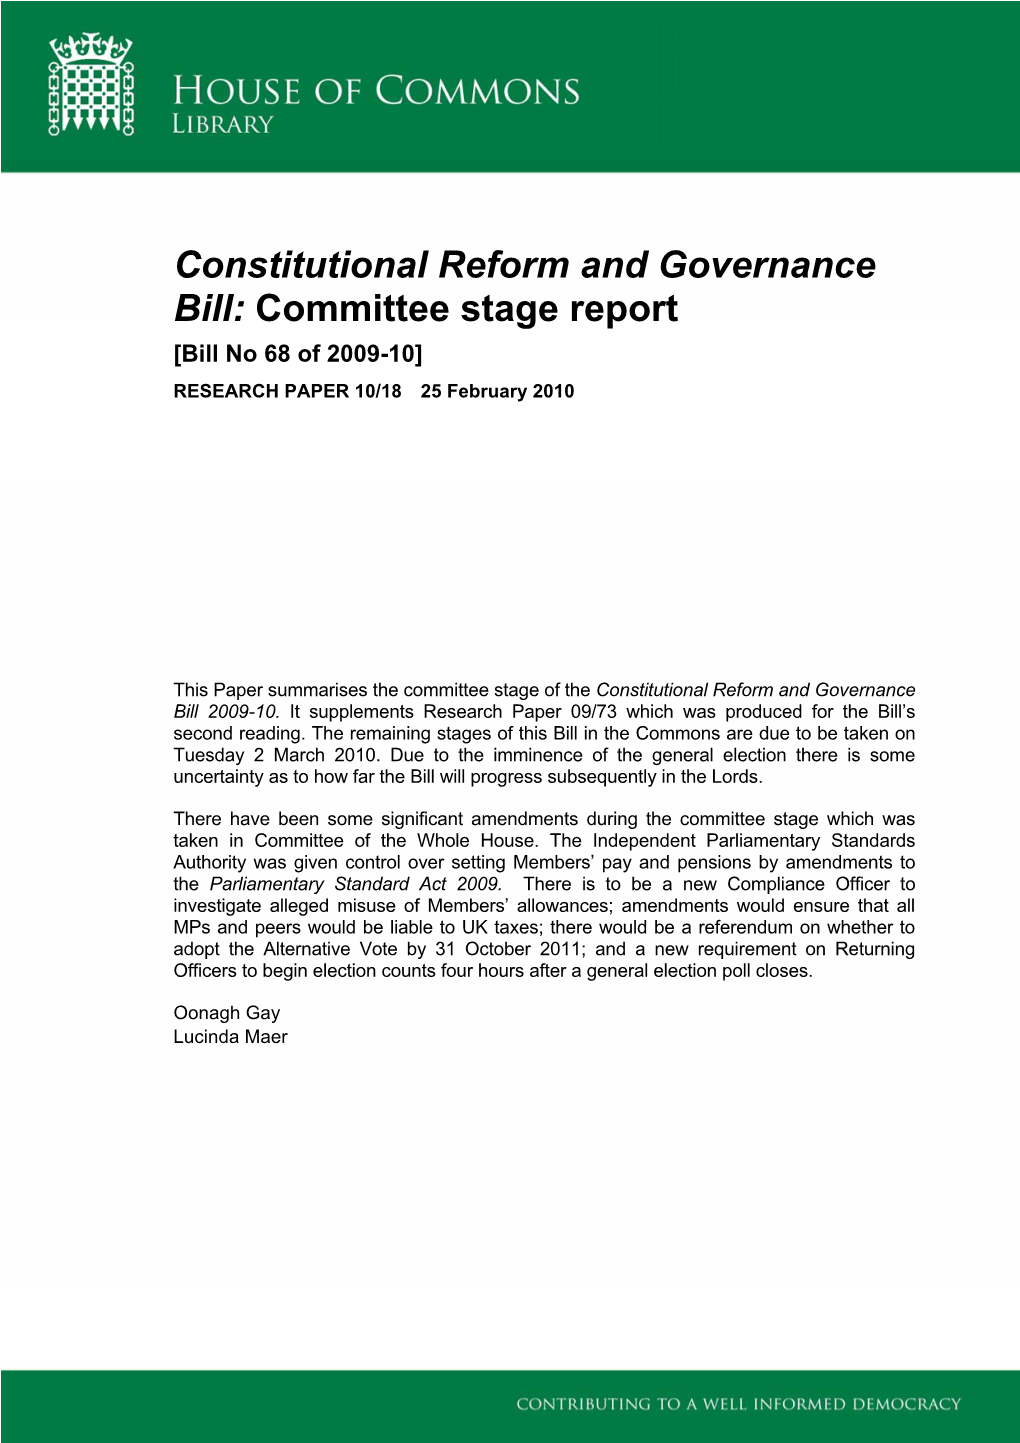 Constitutional Reform and Governance Bill: Committee Stage Report [Bill No 68 of 2009-10] RESEARCH PAPER 10/18 25 February 2010